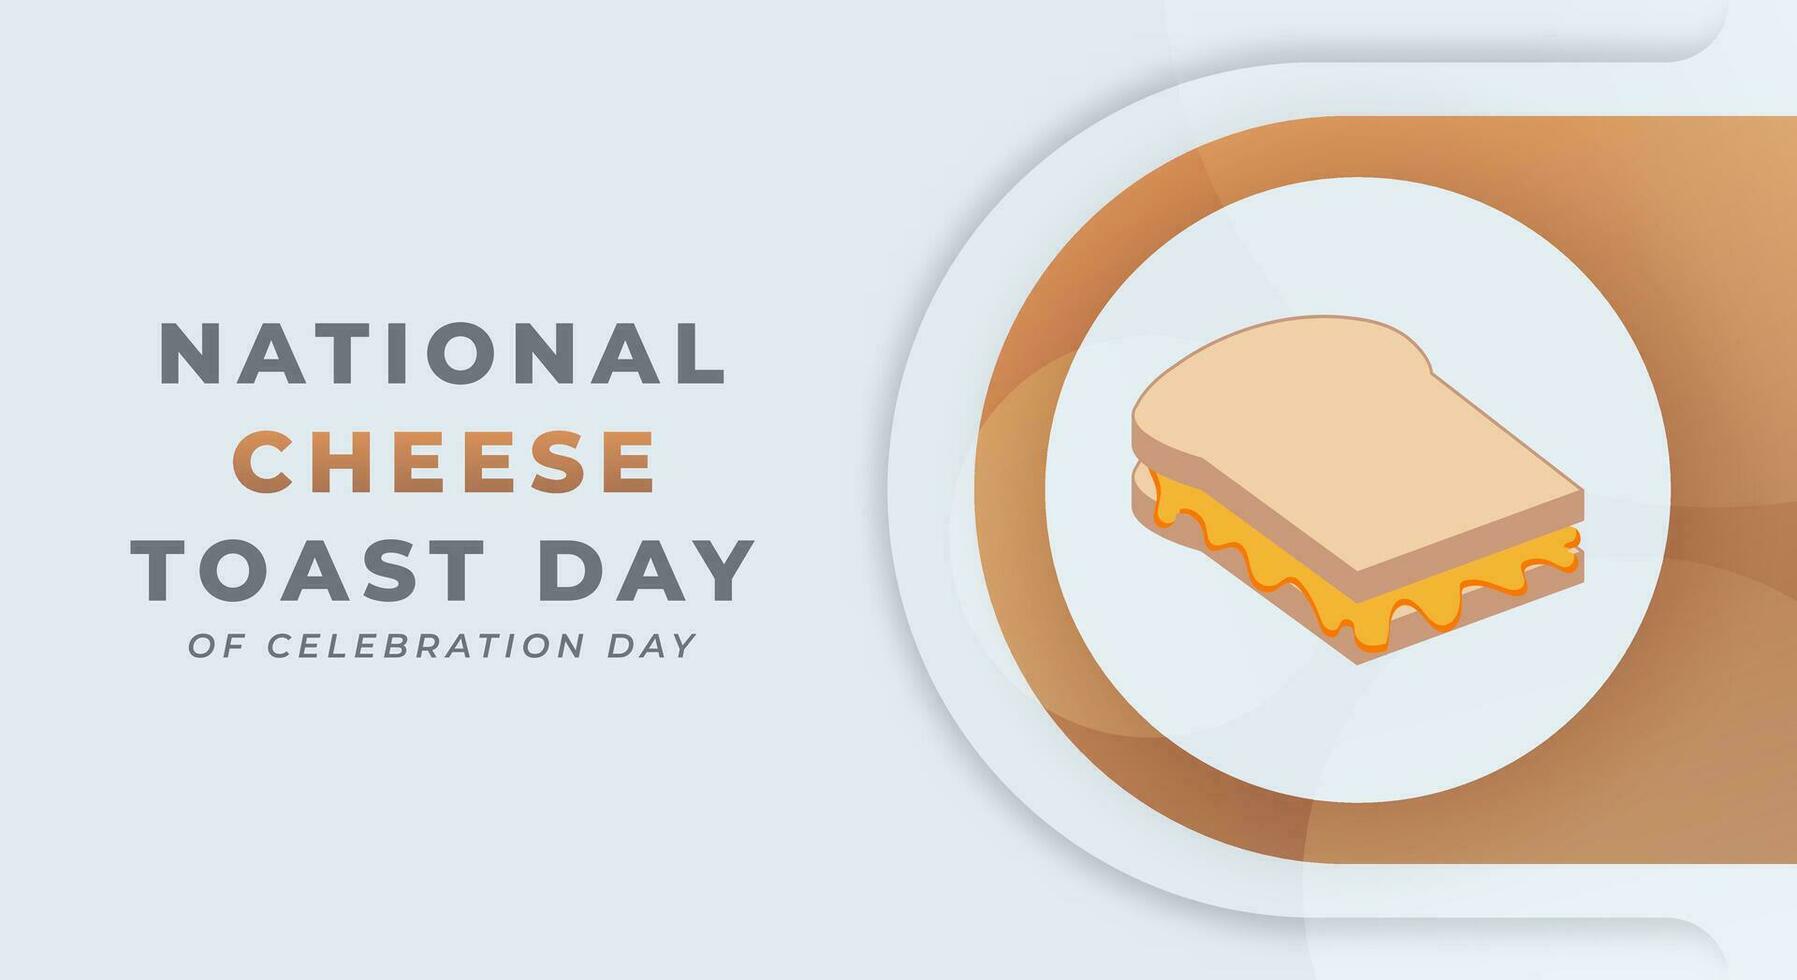 National Cheese Toast Day Celebration Vector Design Illustration for